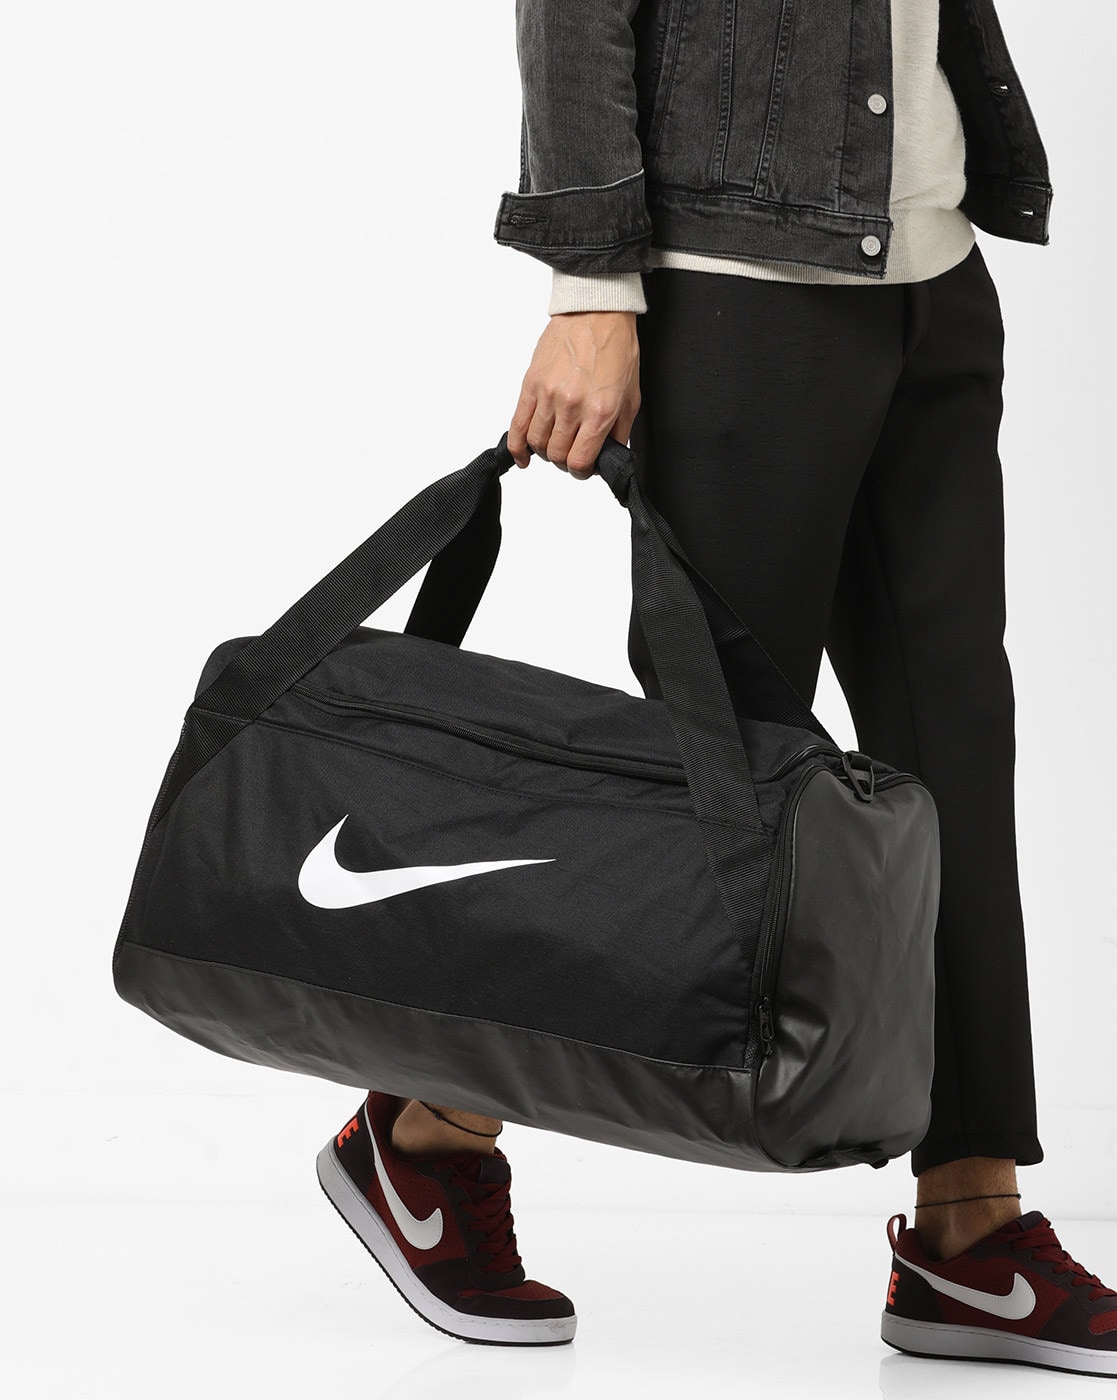 The Best Nike Bags for Basketball Gear. Nike IN